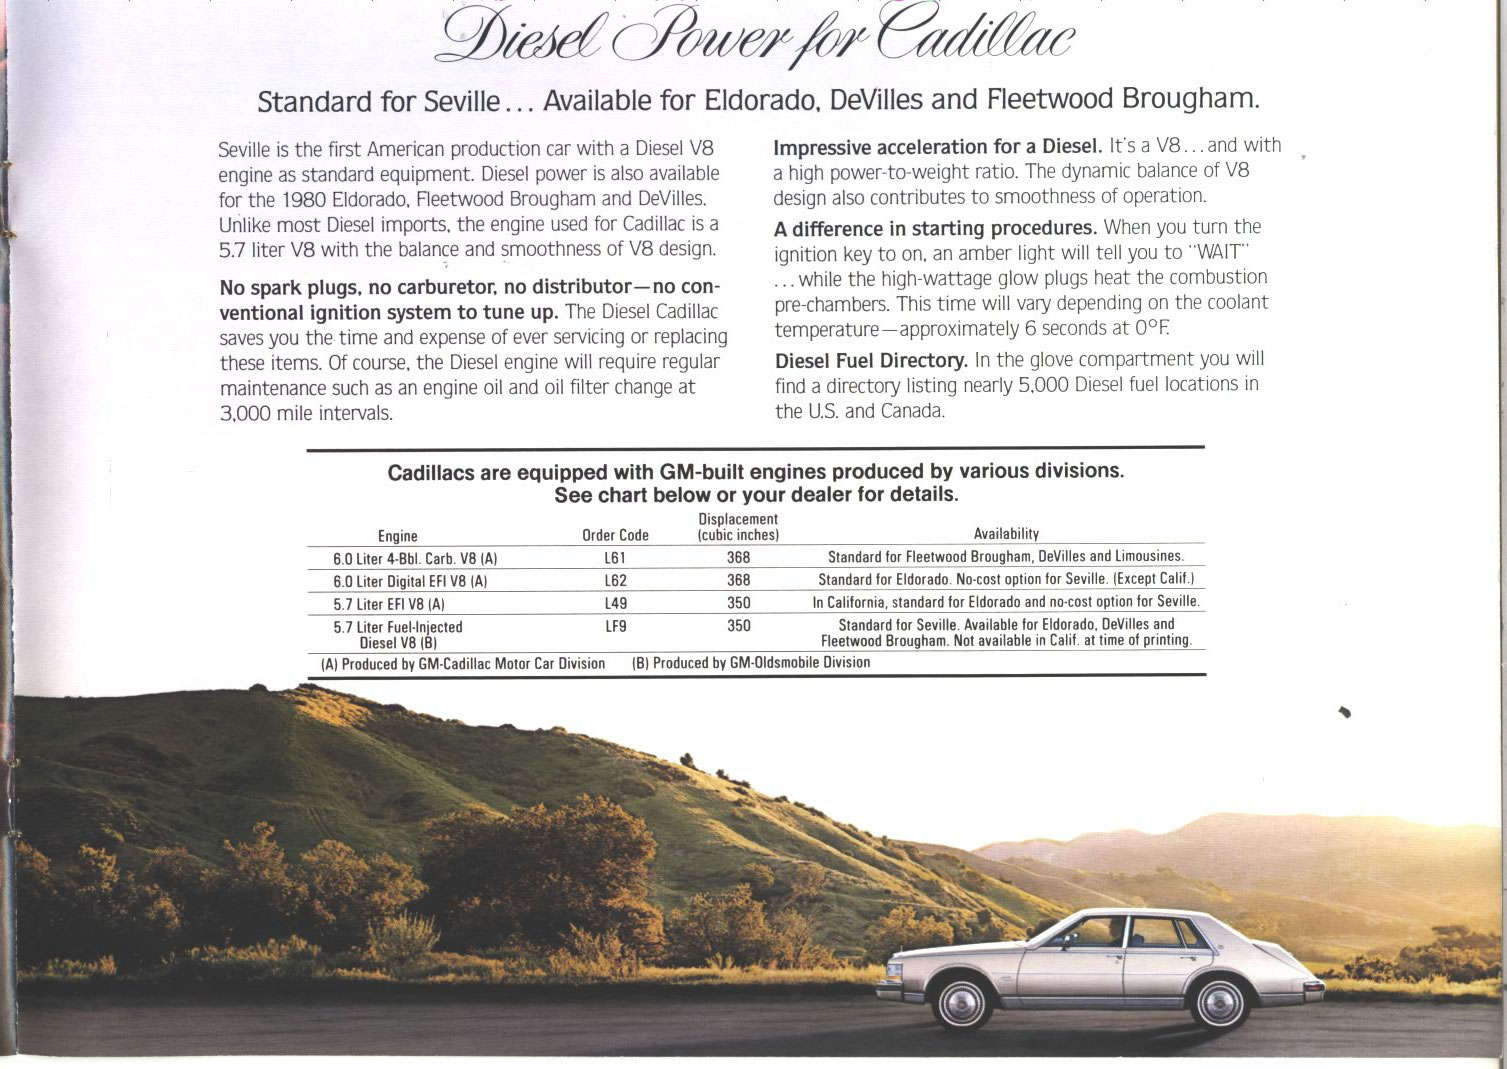 1980 Cadillac Preview Brochure Page 2